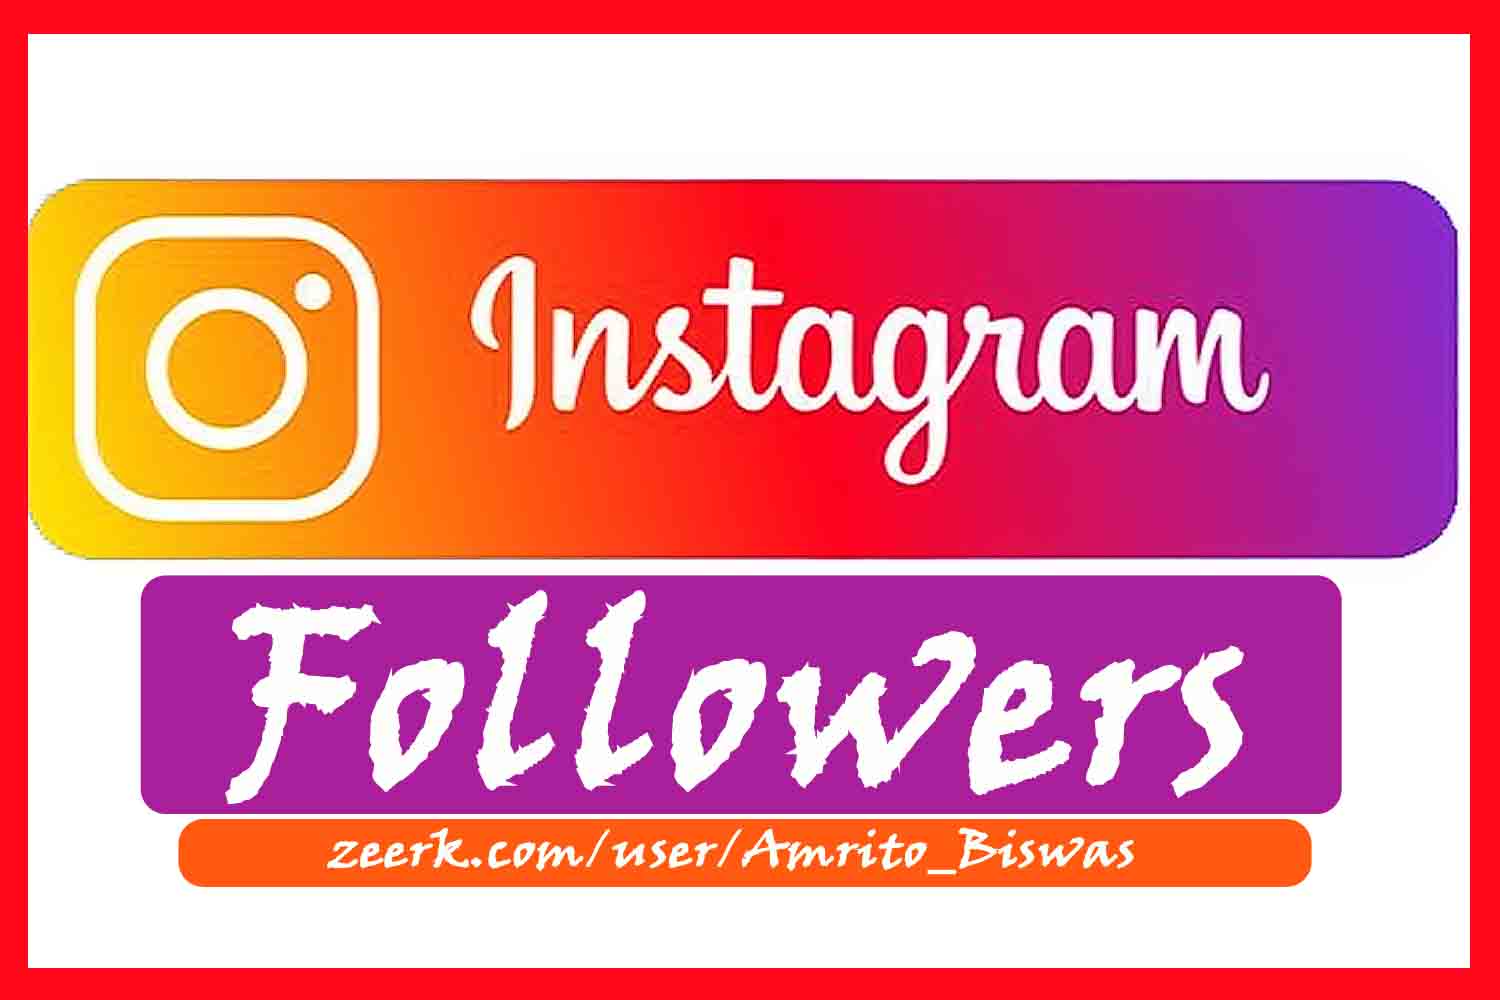 You Will get 2,500+ Instagram Real Followers, All Active User, None Dropped,100% Guarantee.